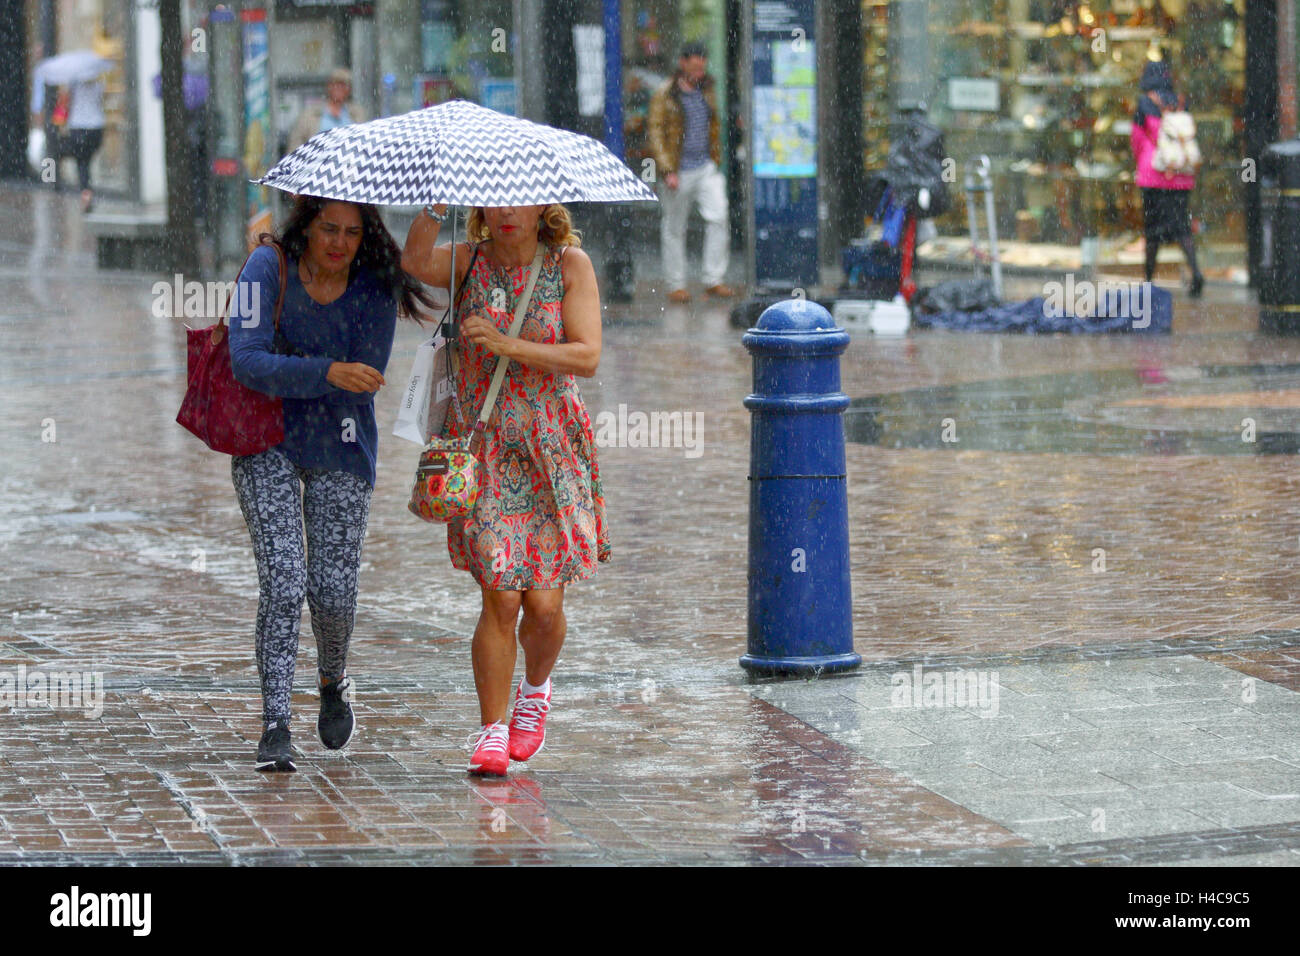 Two females caught in a sudden shower of rain try to stay dry under an umbrella in Kingston, Surrey, England. Stock Photo